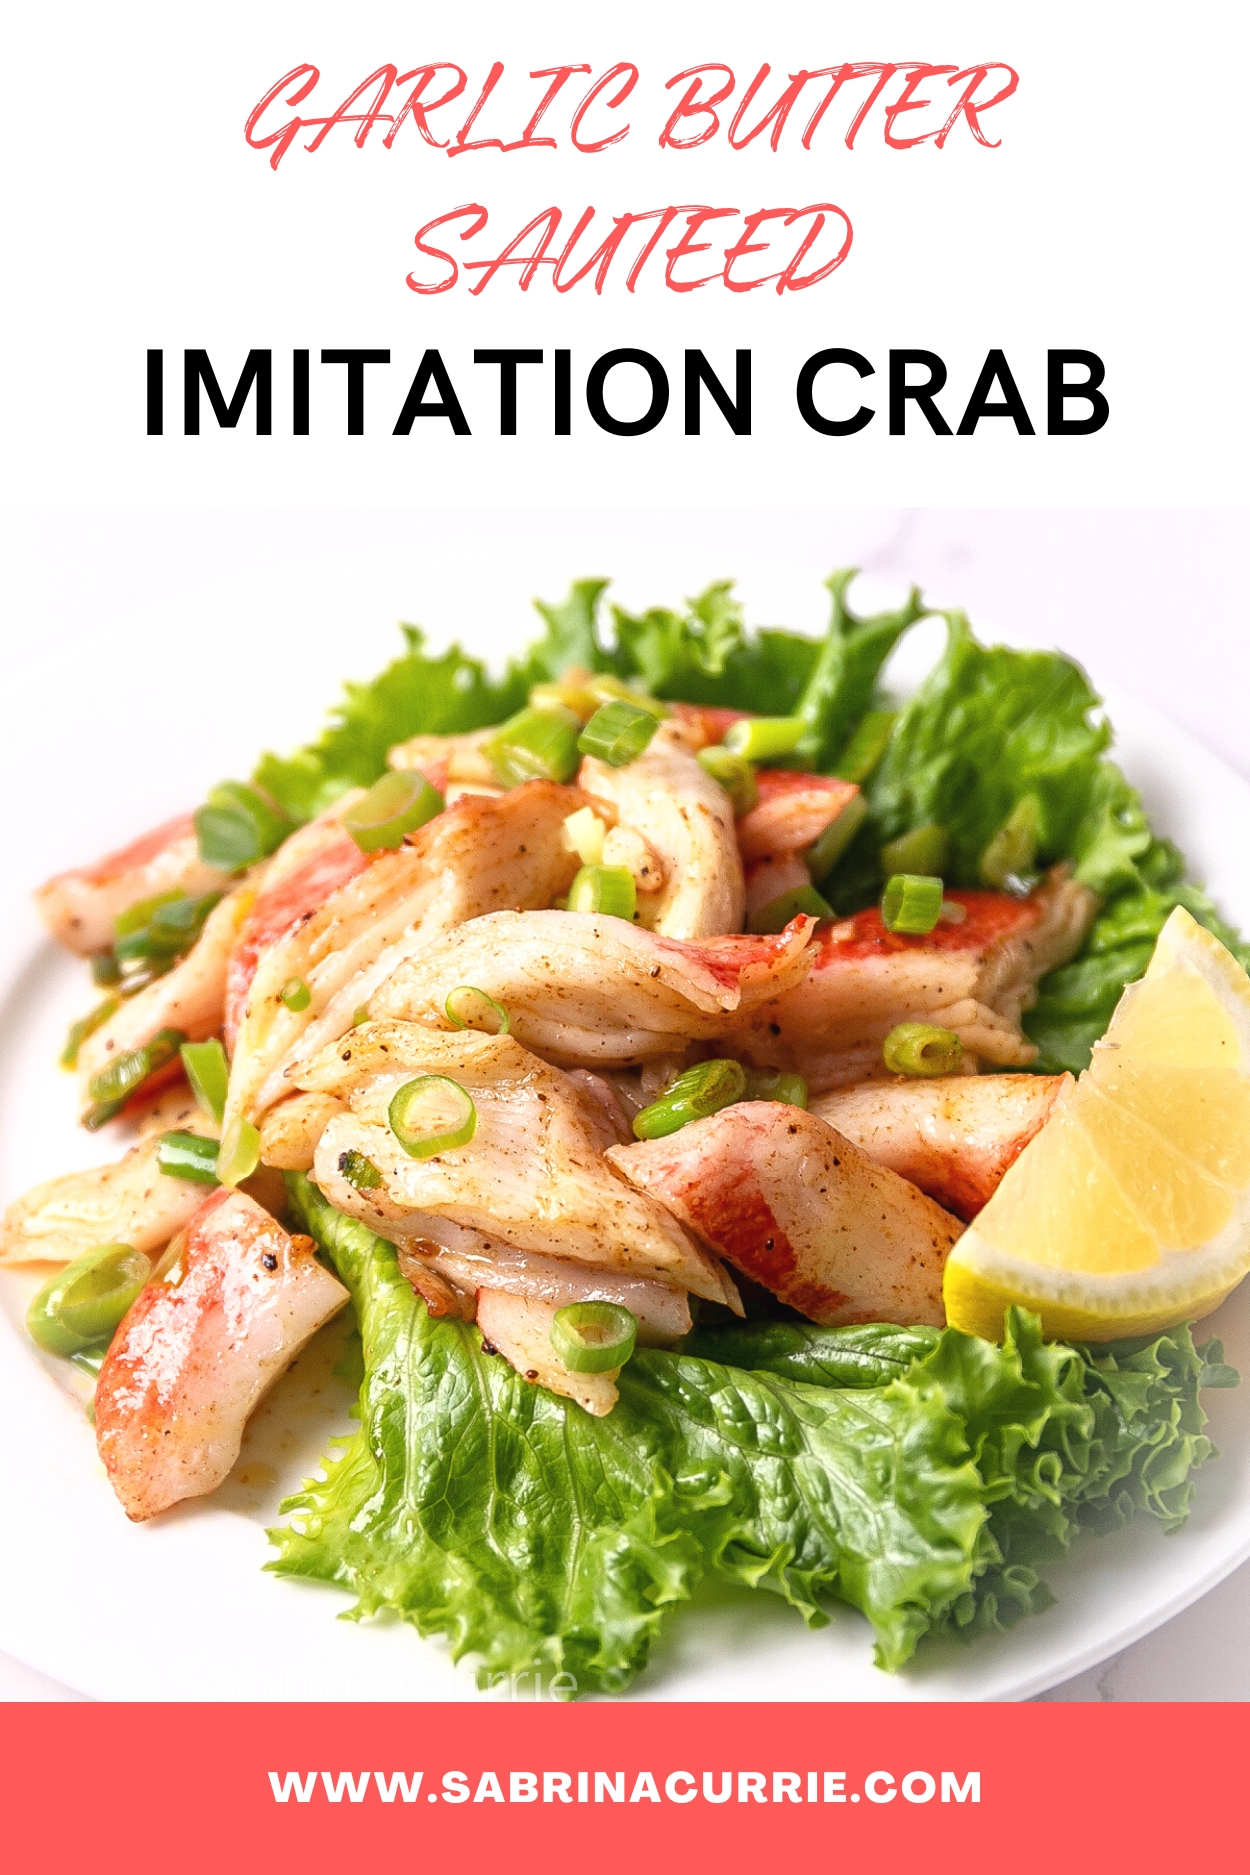 Recipe title at top of graphic with sauteed pink and white imitation crab meat on top of green lettuce in the middle. Website, sabrinacurrie.com is in white text over a hot pink banner on the bottom.